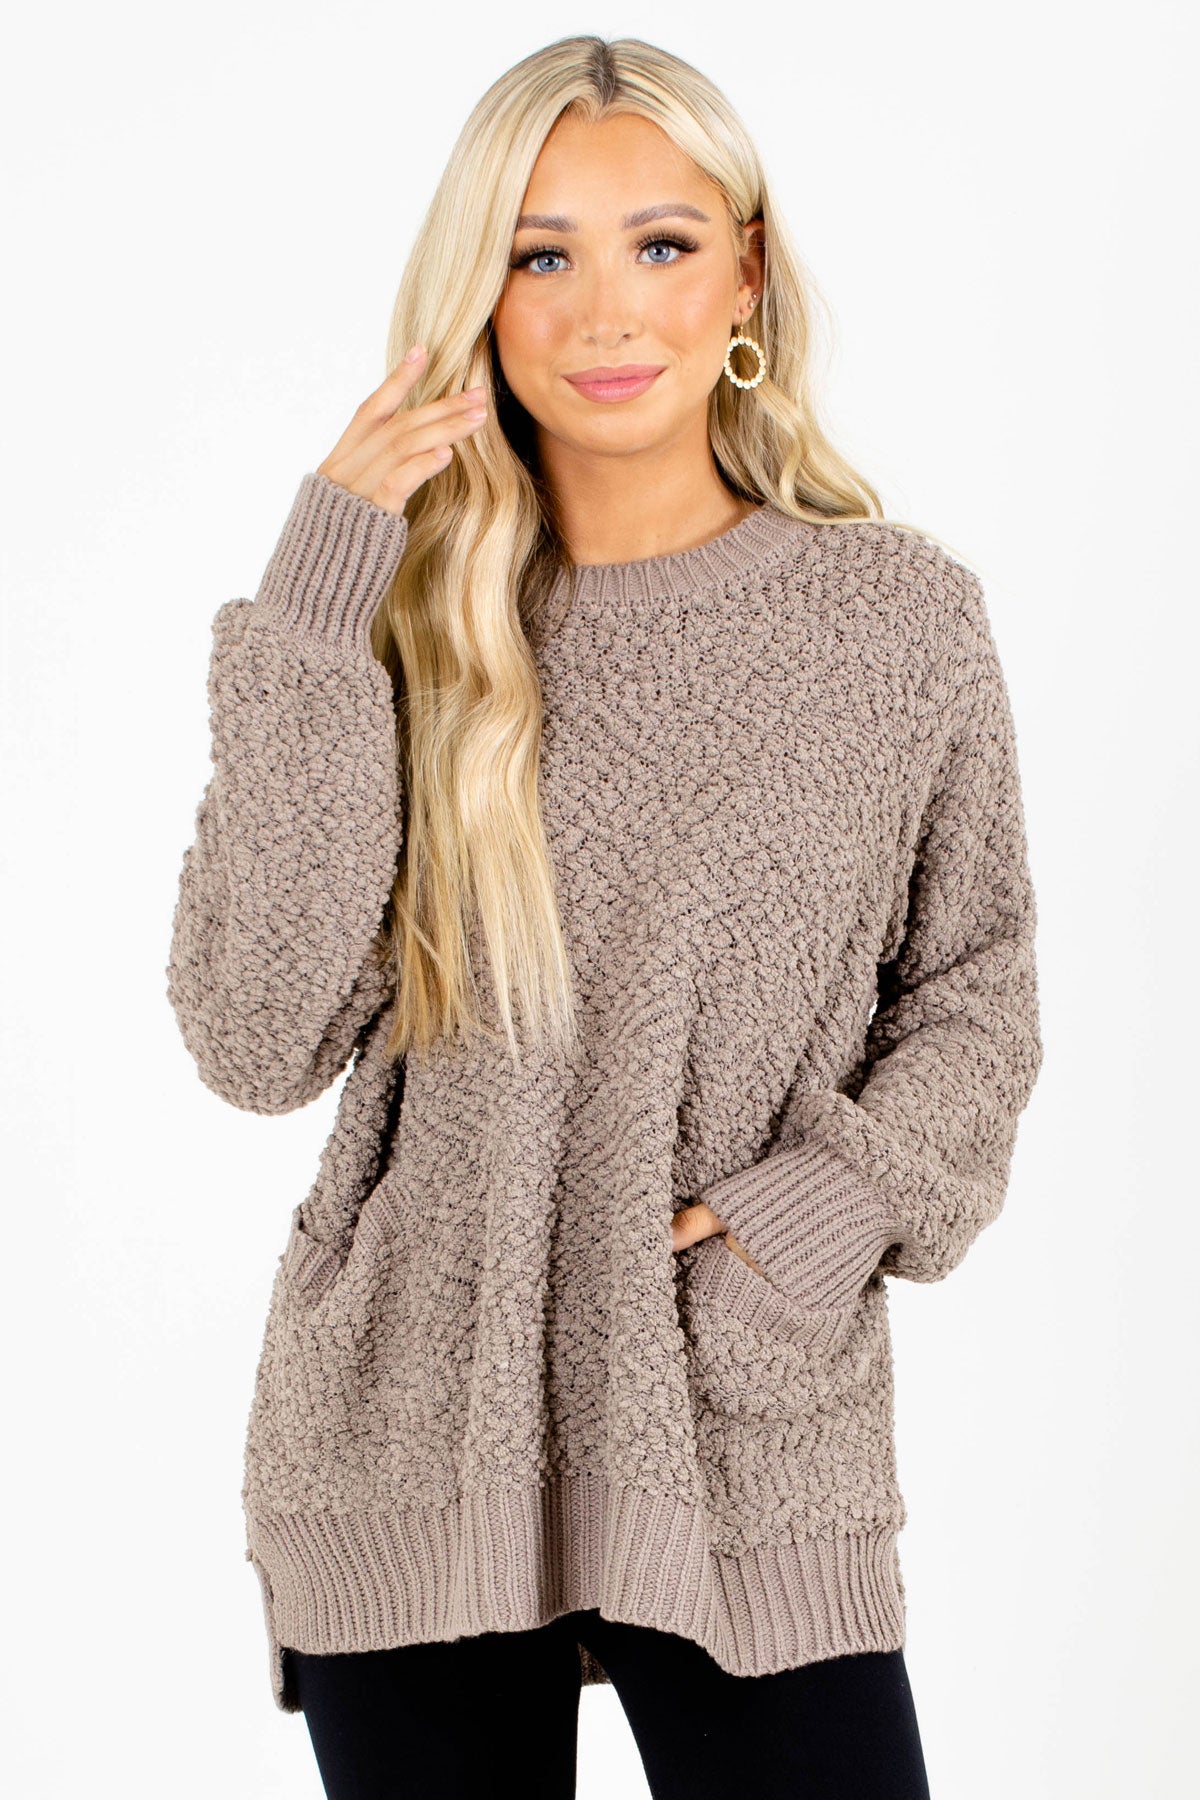 Brown Popcorn Knit Boutique Sweaters for Women